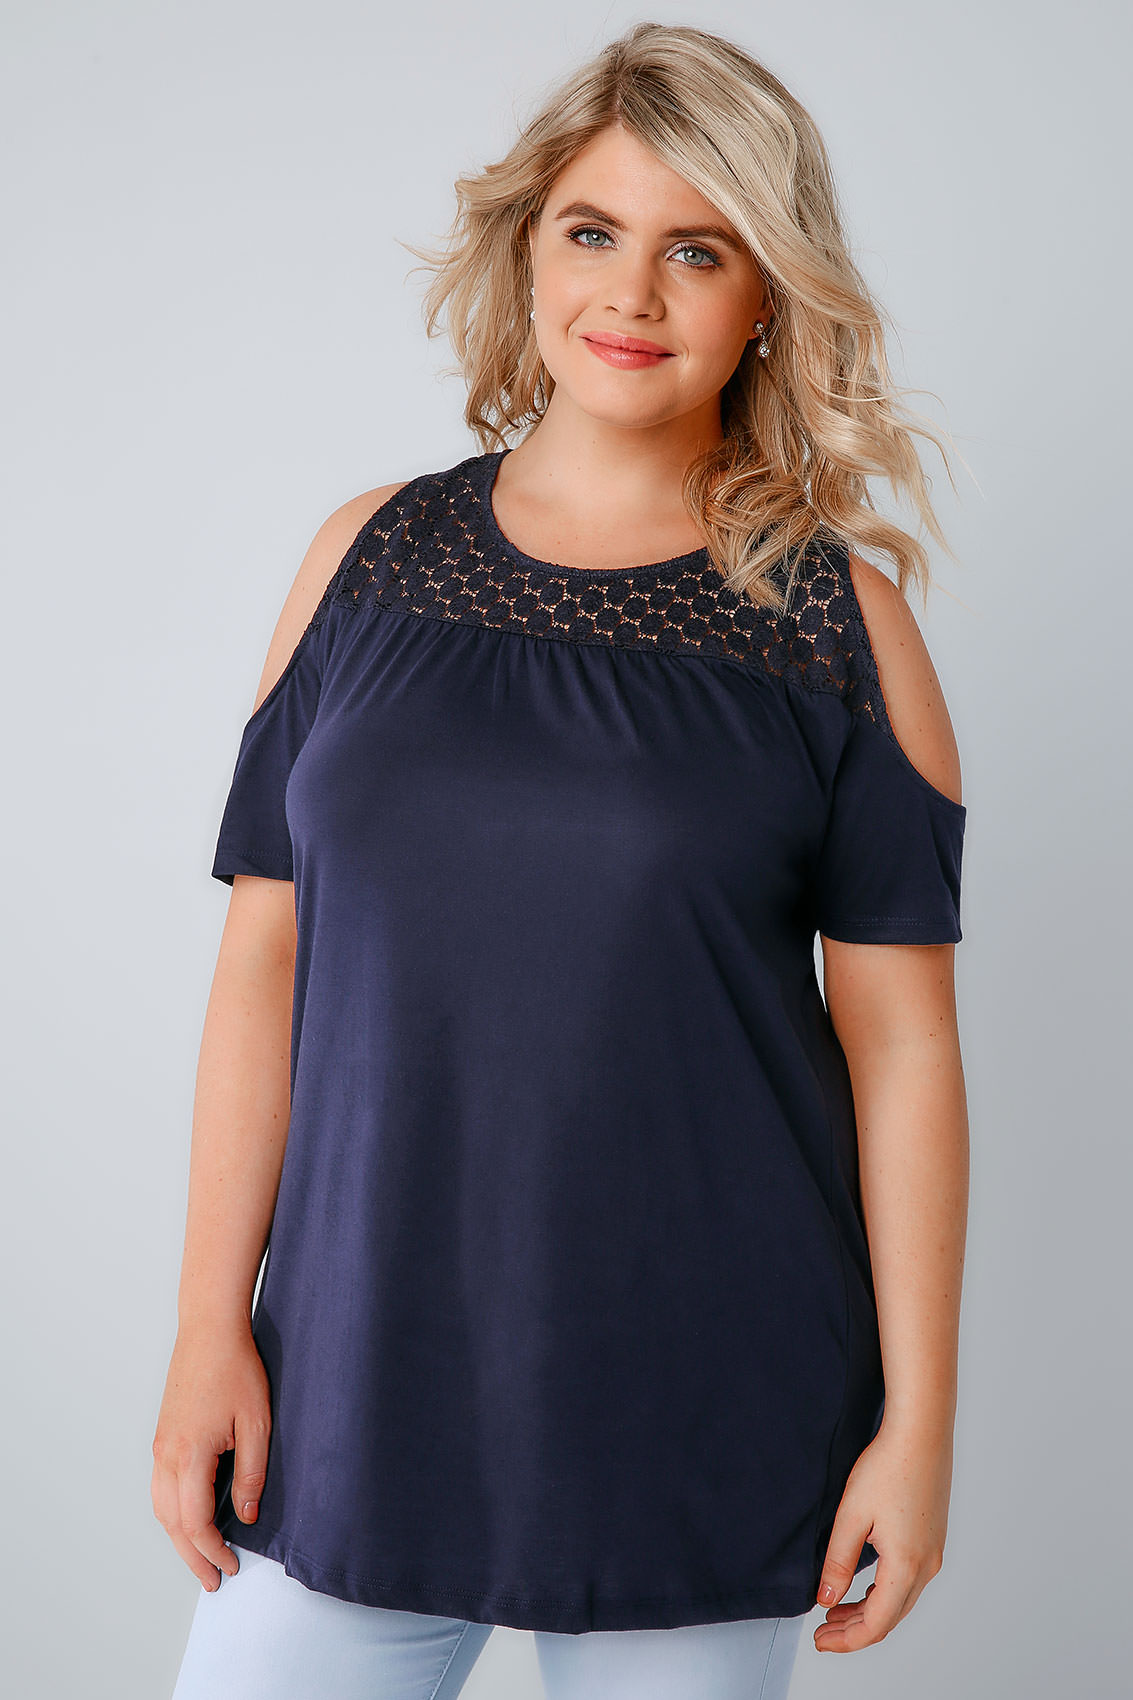 Navy Cold Shoulder Jersey Top With Lace Yoke, Plus size 16 to 36